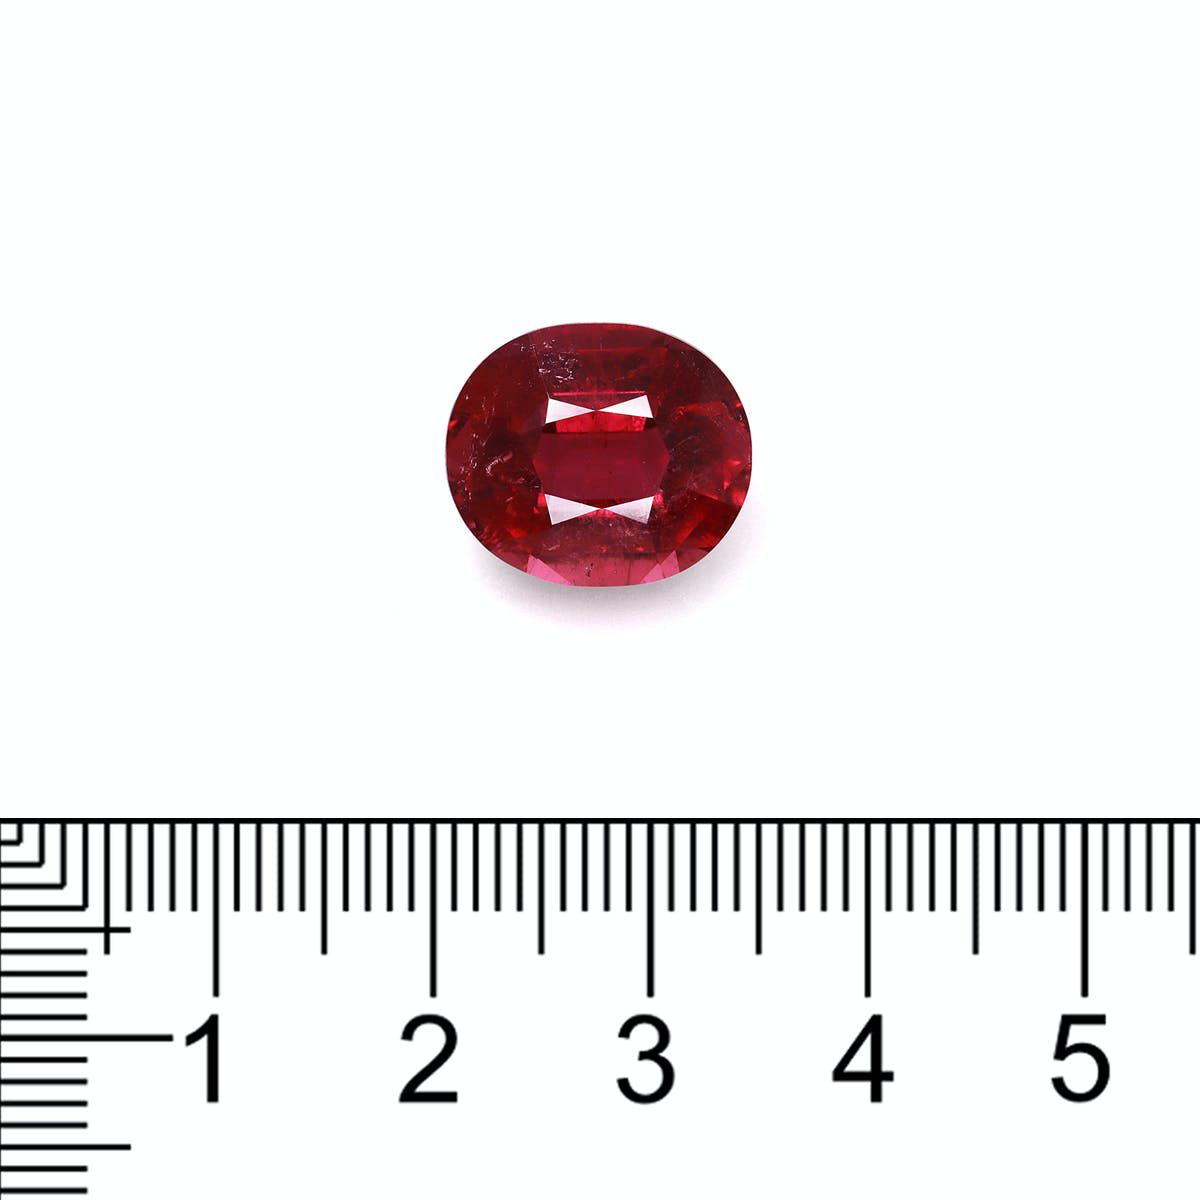 Picture of Cherry Red Rubellite Tourmaline 7.91ct - 14x12mm (RL0631)